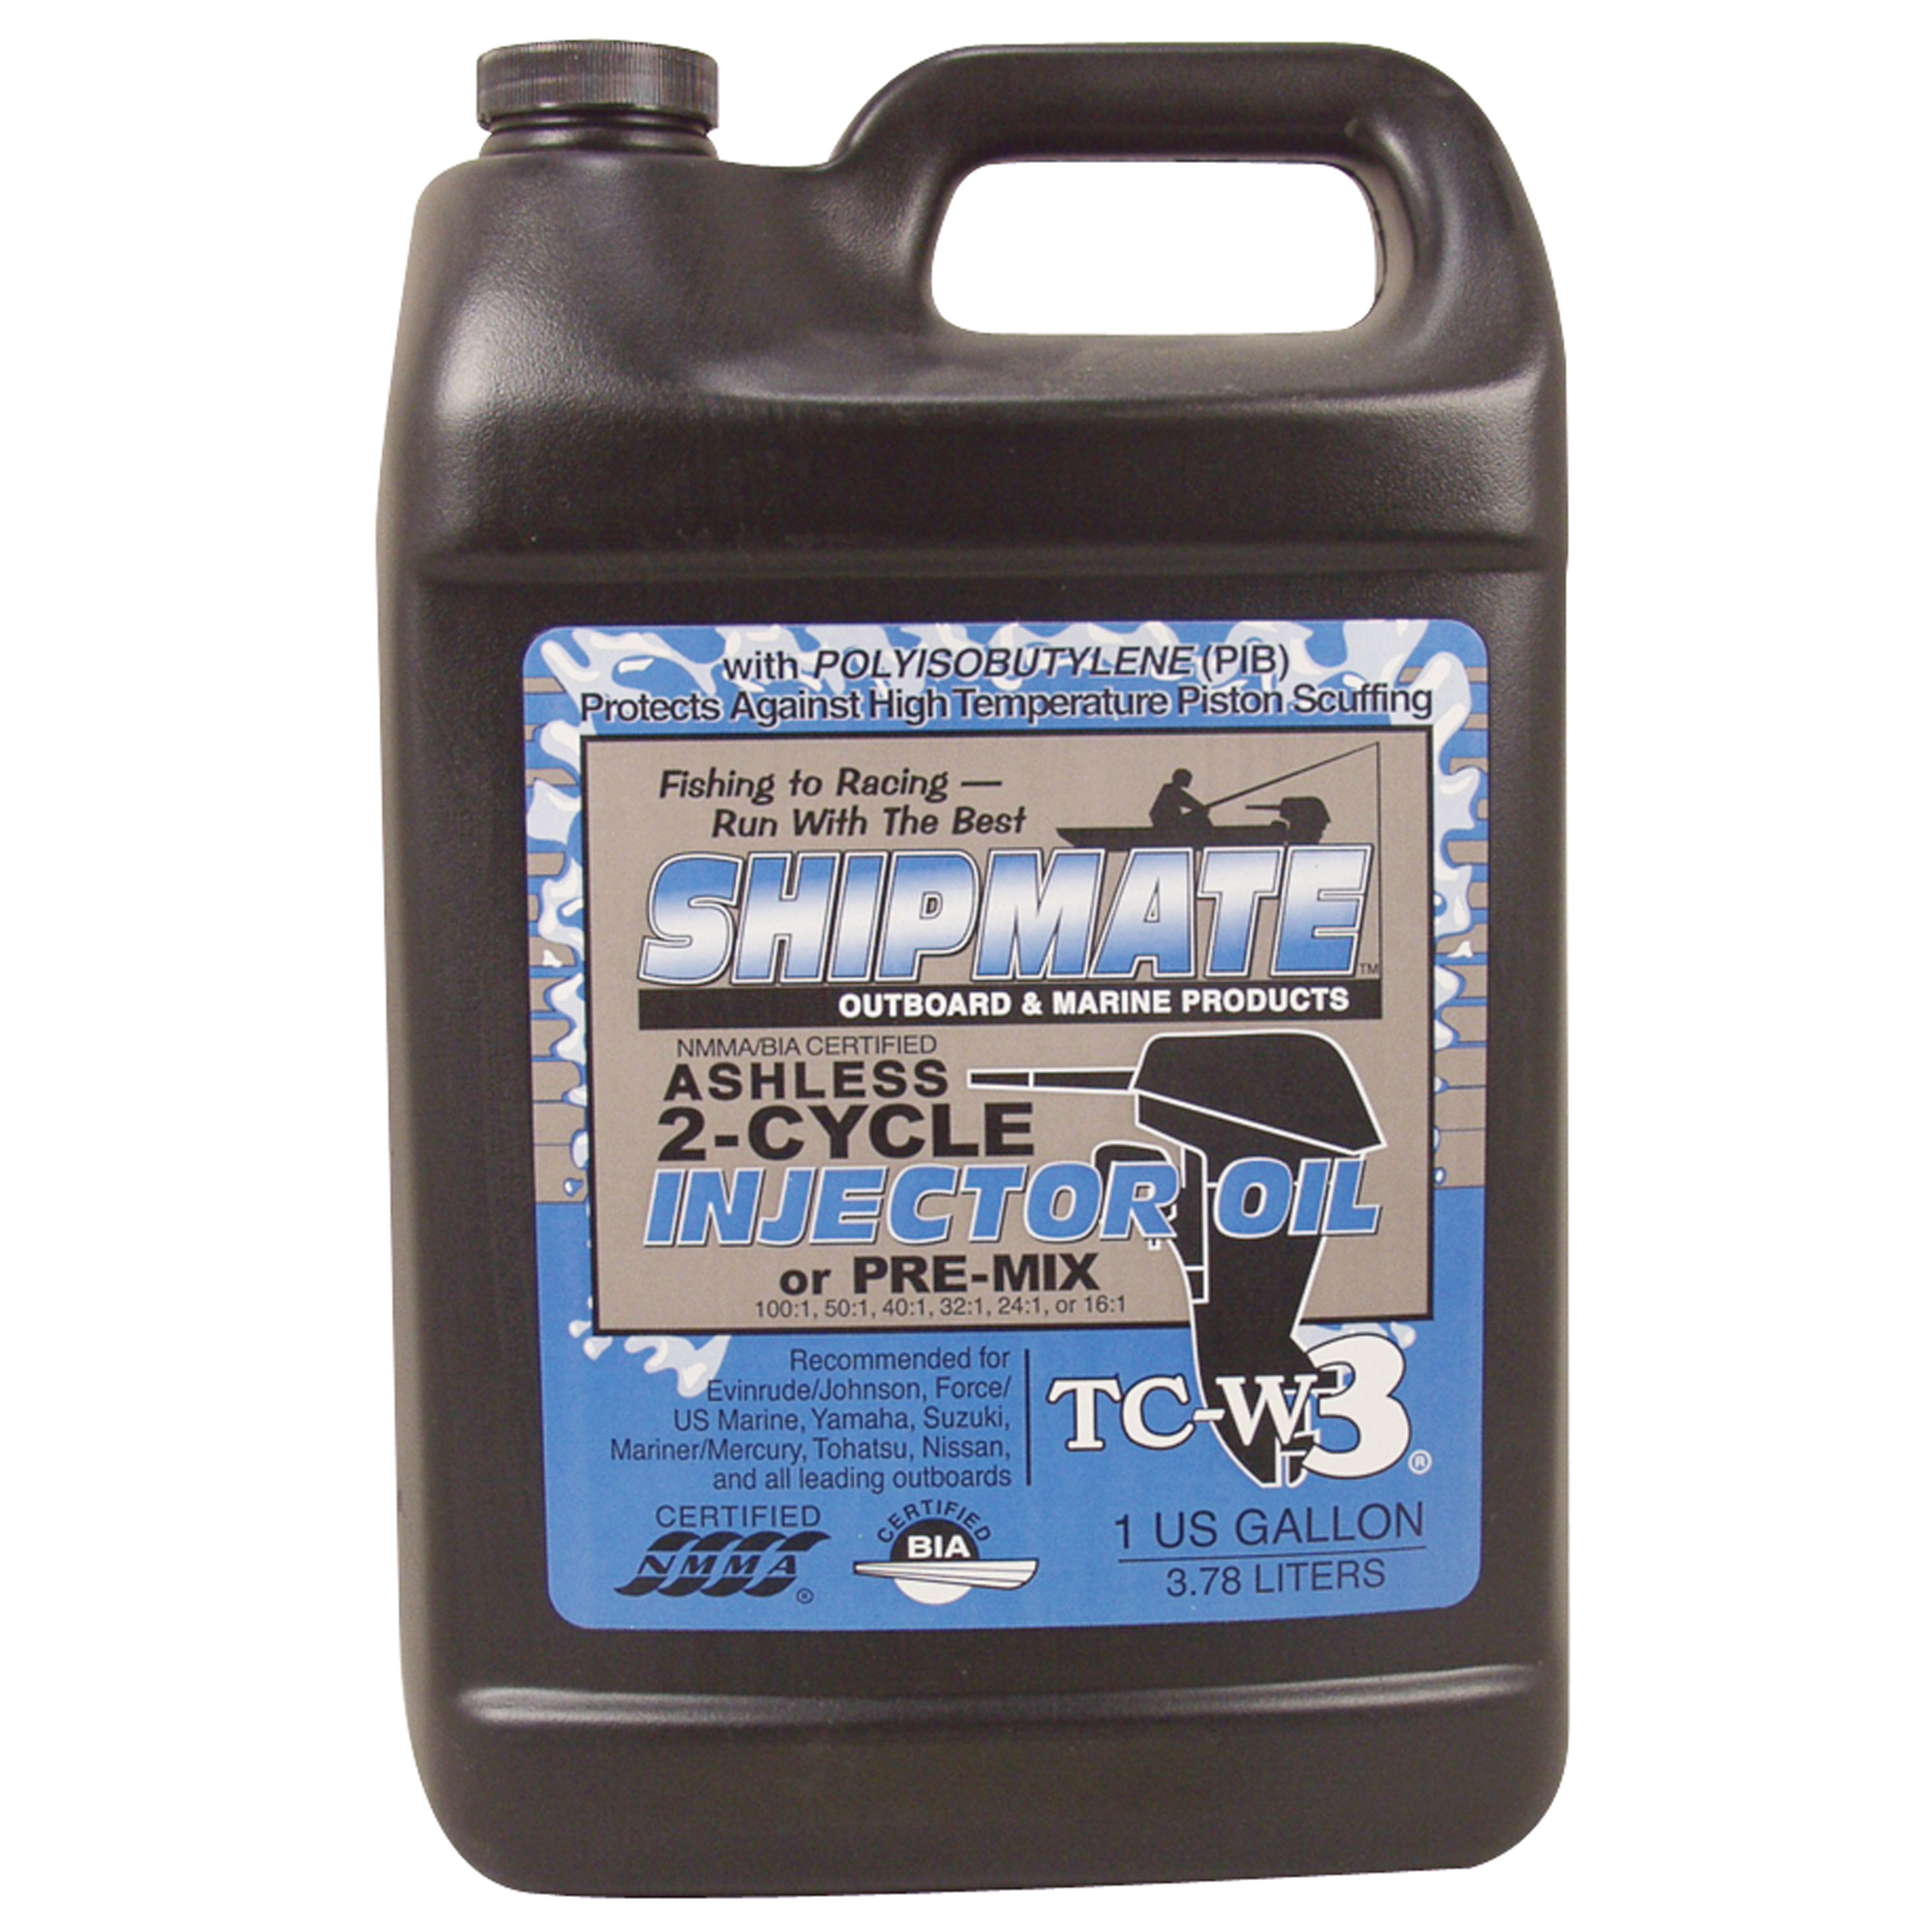 Shipmate 1020 4052 Outboard Synthetic Blend 2 Cycle Oil Tc W3